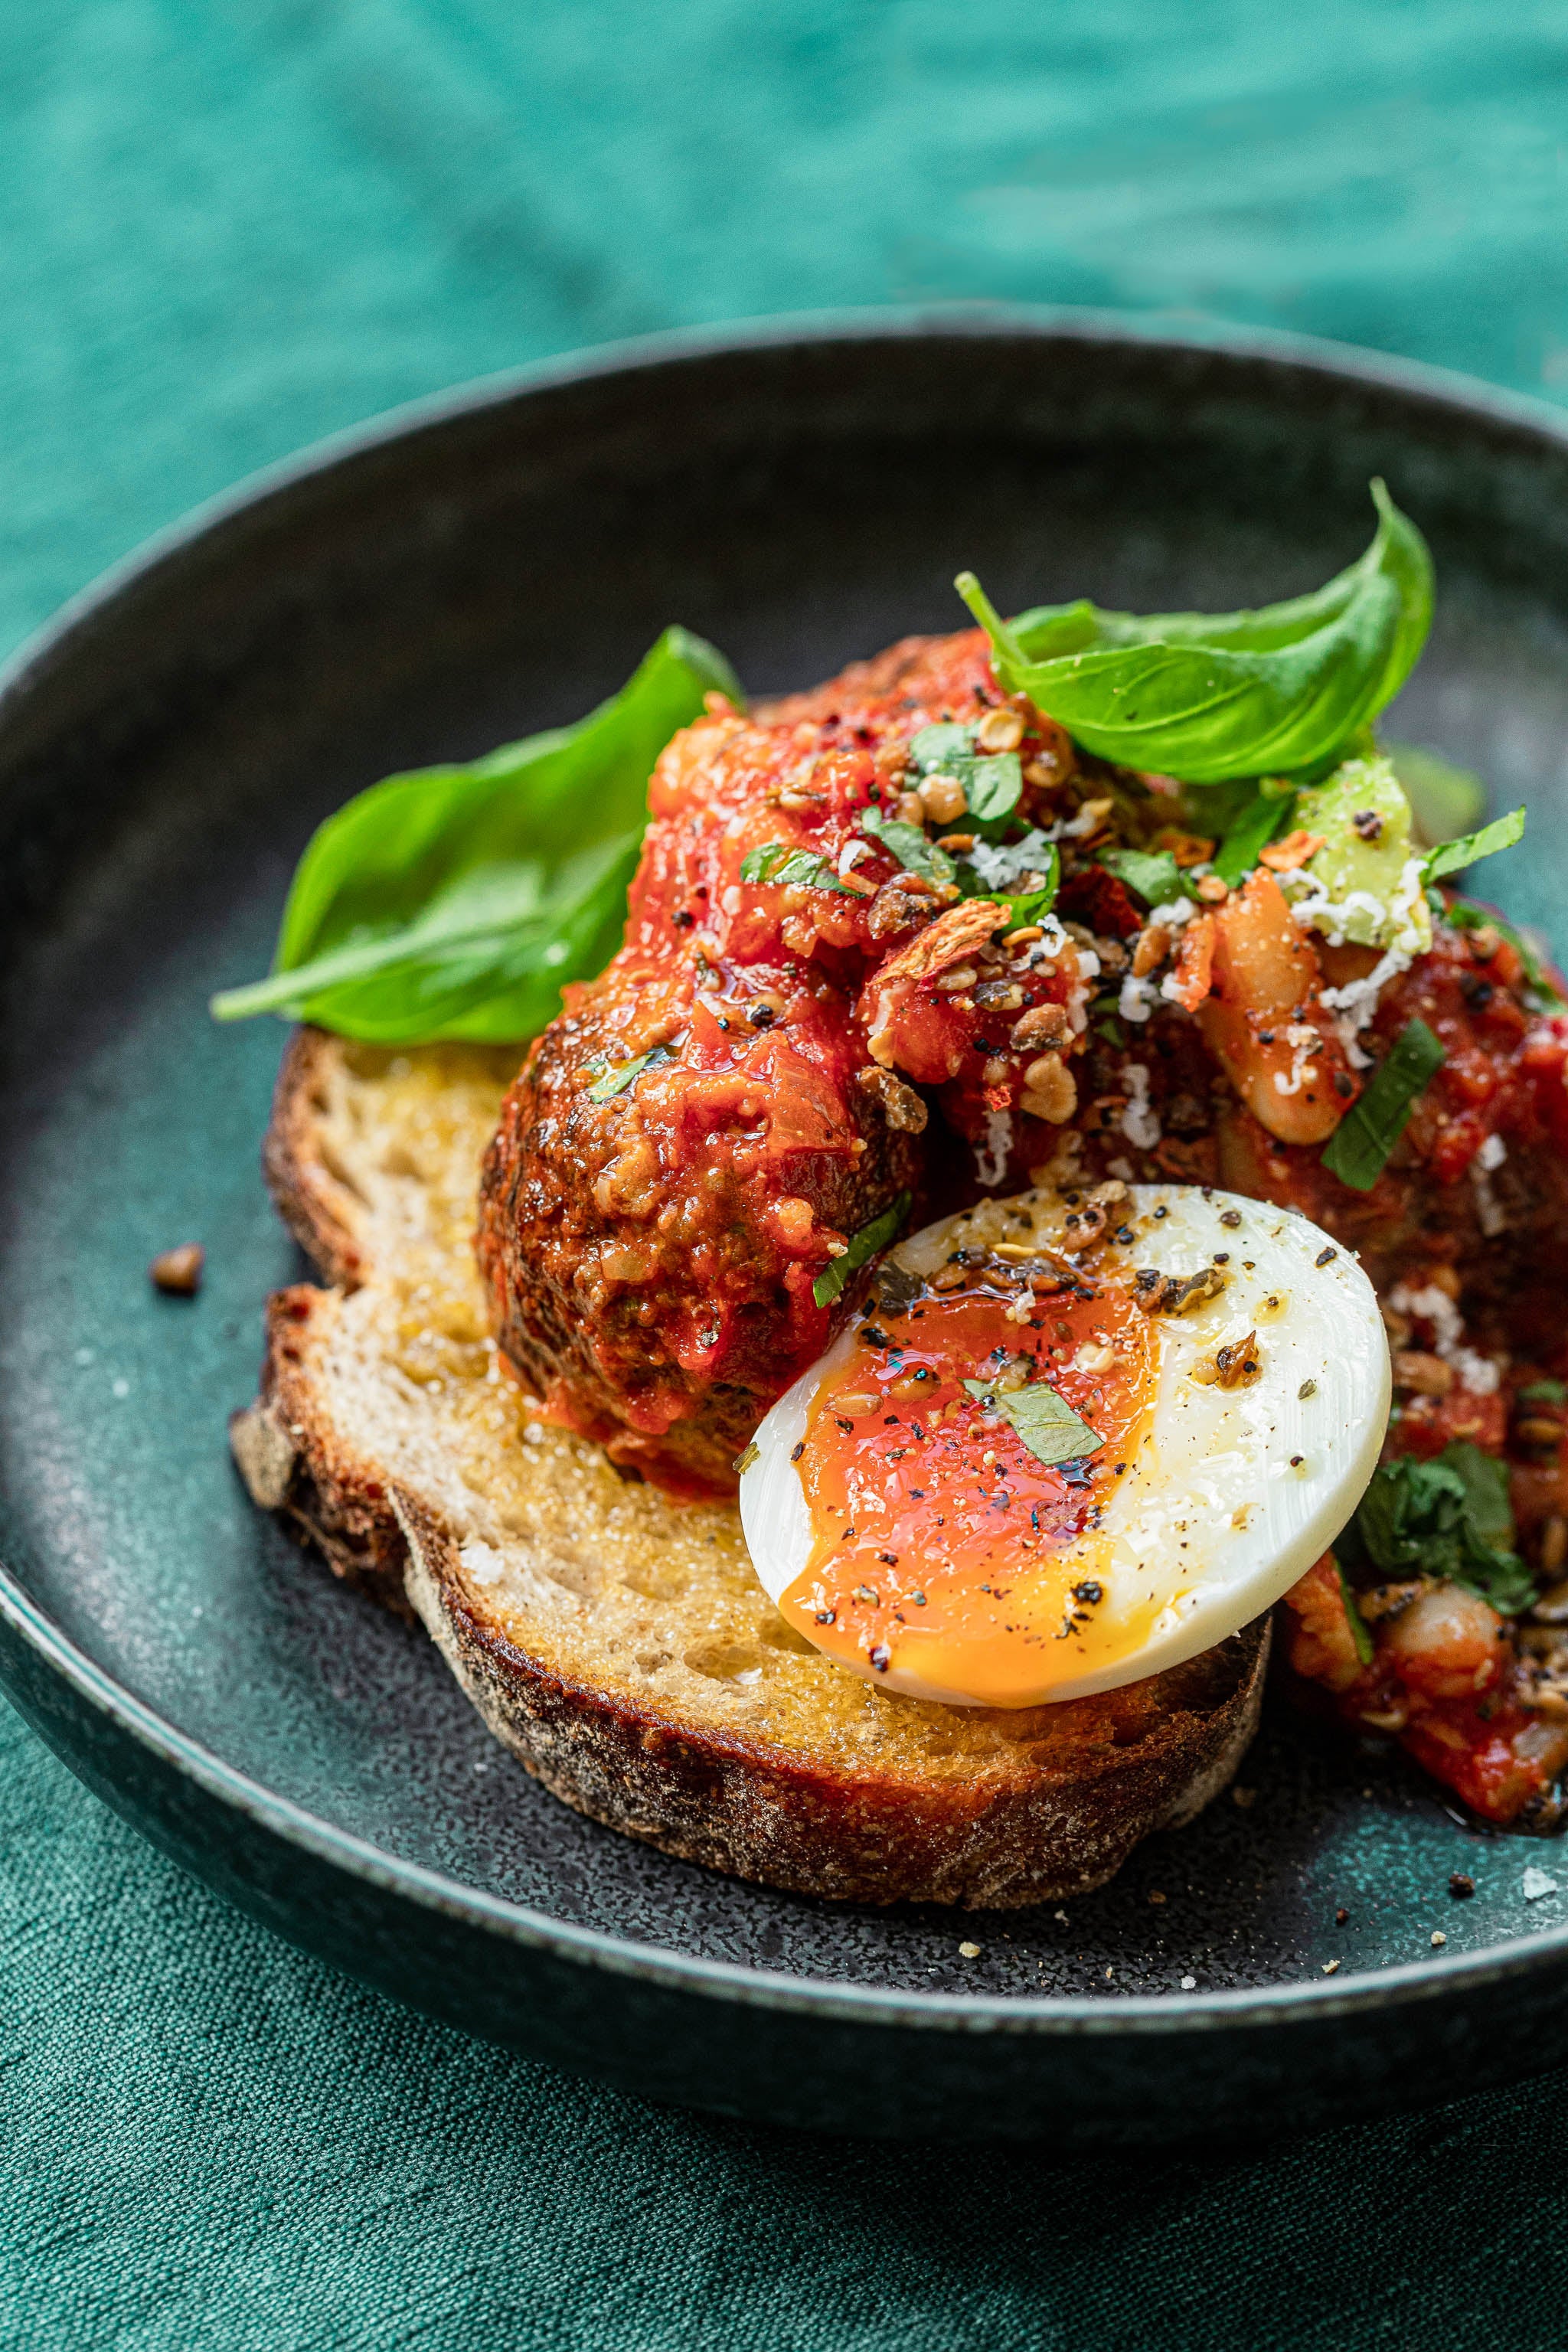 Ostrich Amore Meatballs with Tomato Sauce, Runny Yolk Eggs, & Fresh Basil